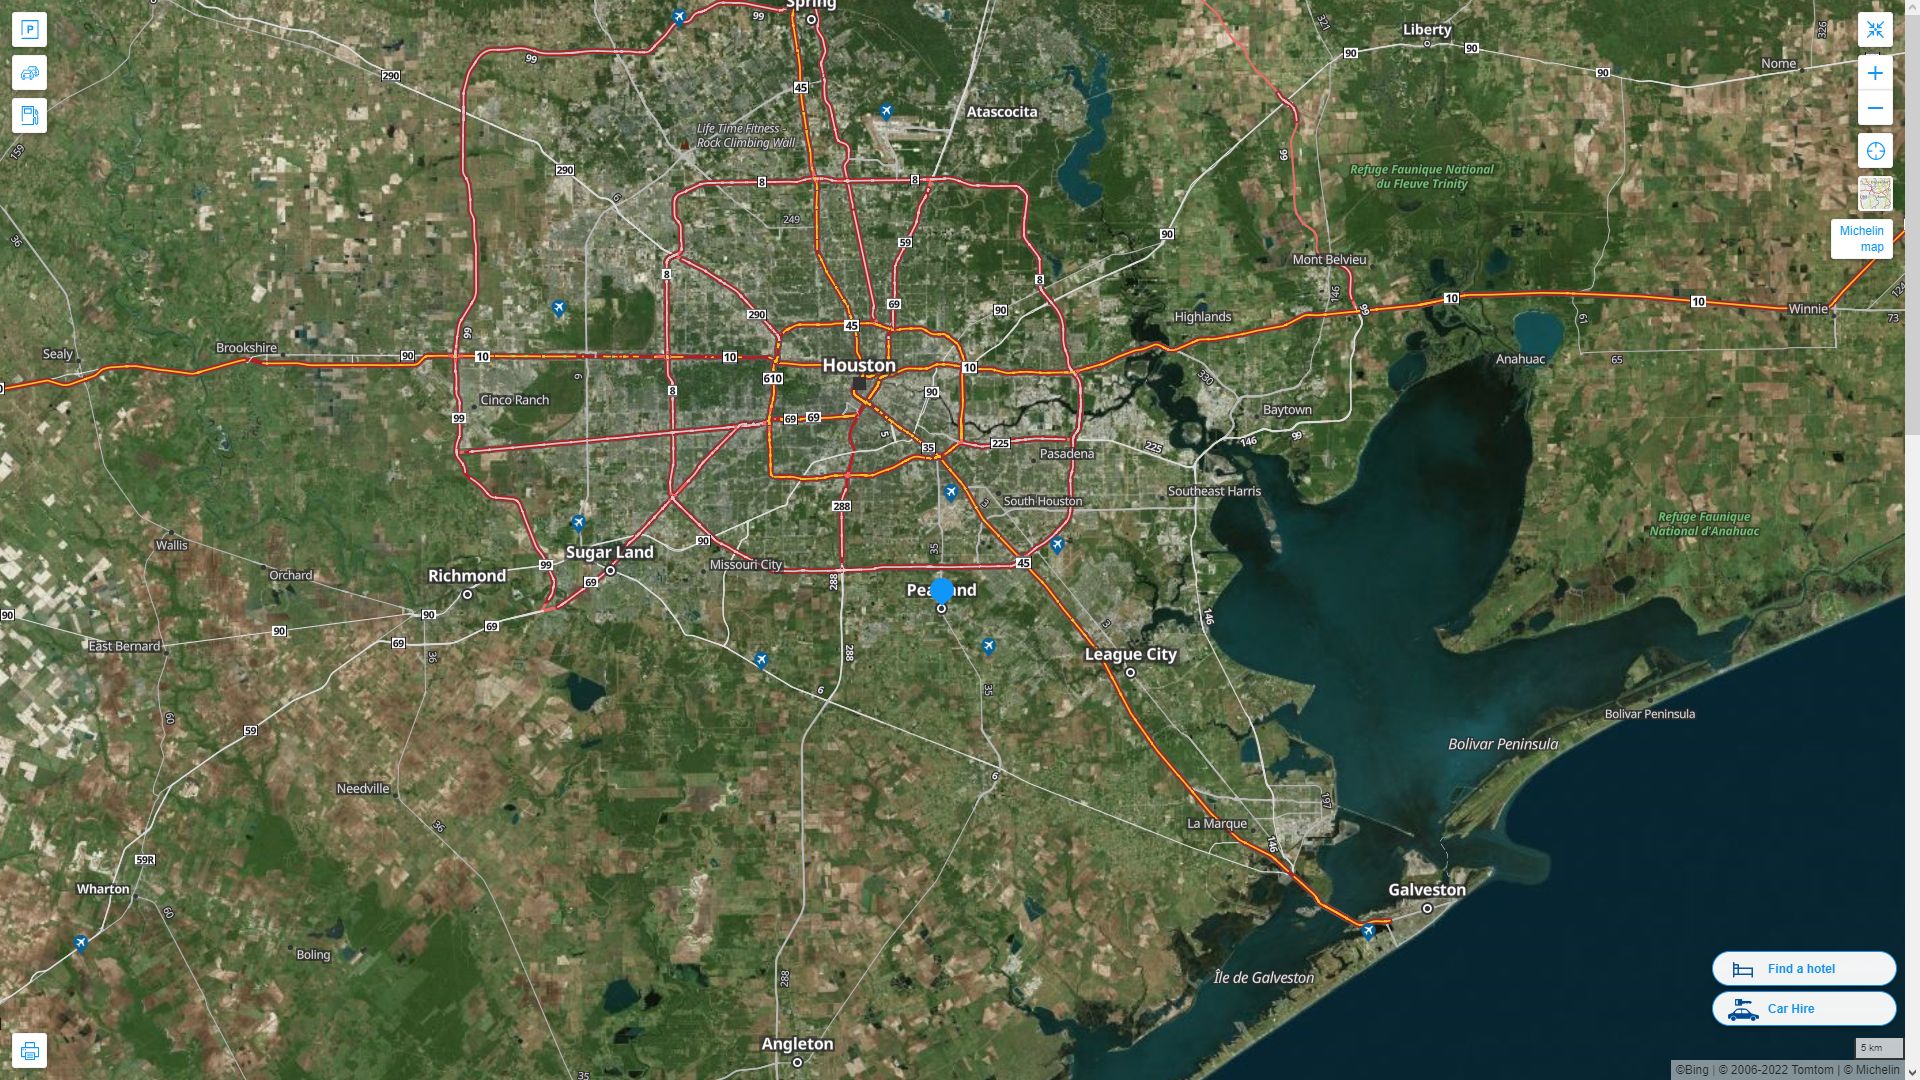 Pearland Texas Highway and Road Map with Satellite View